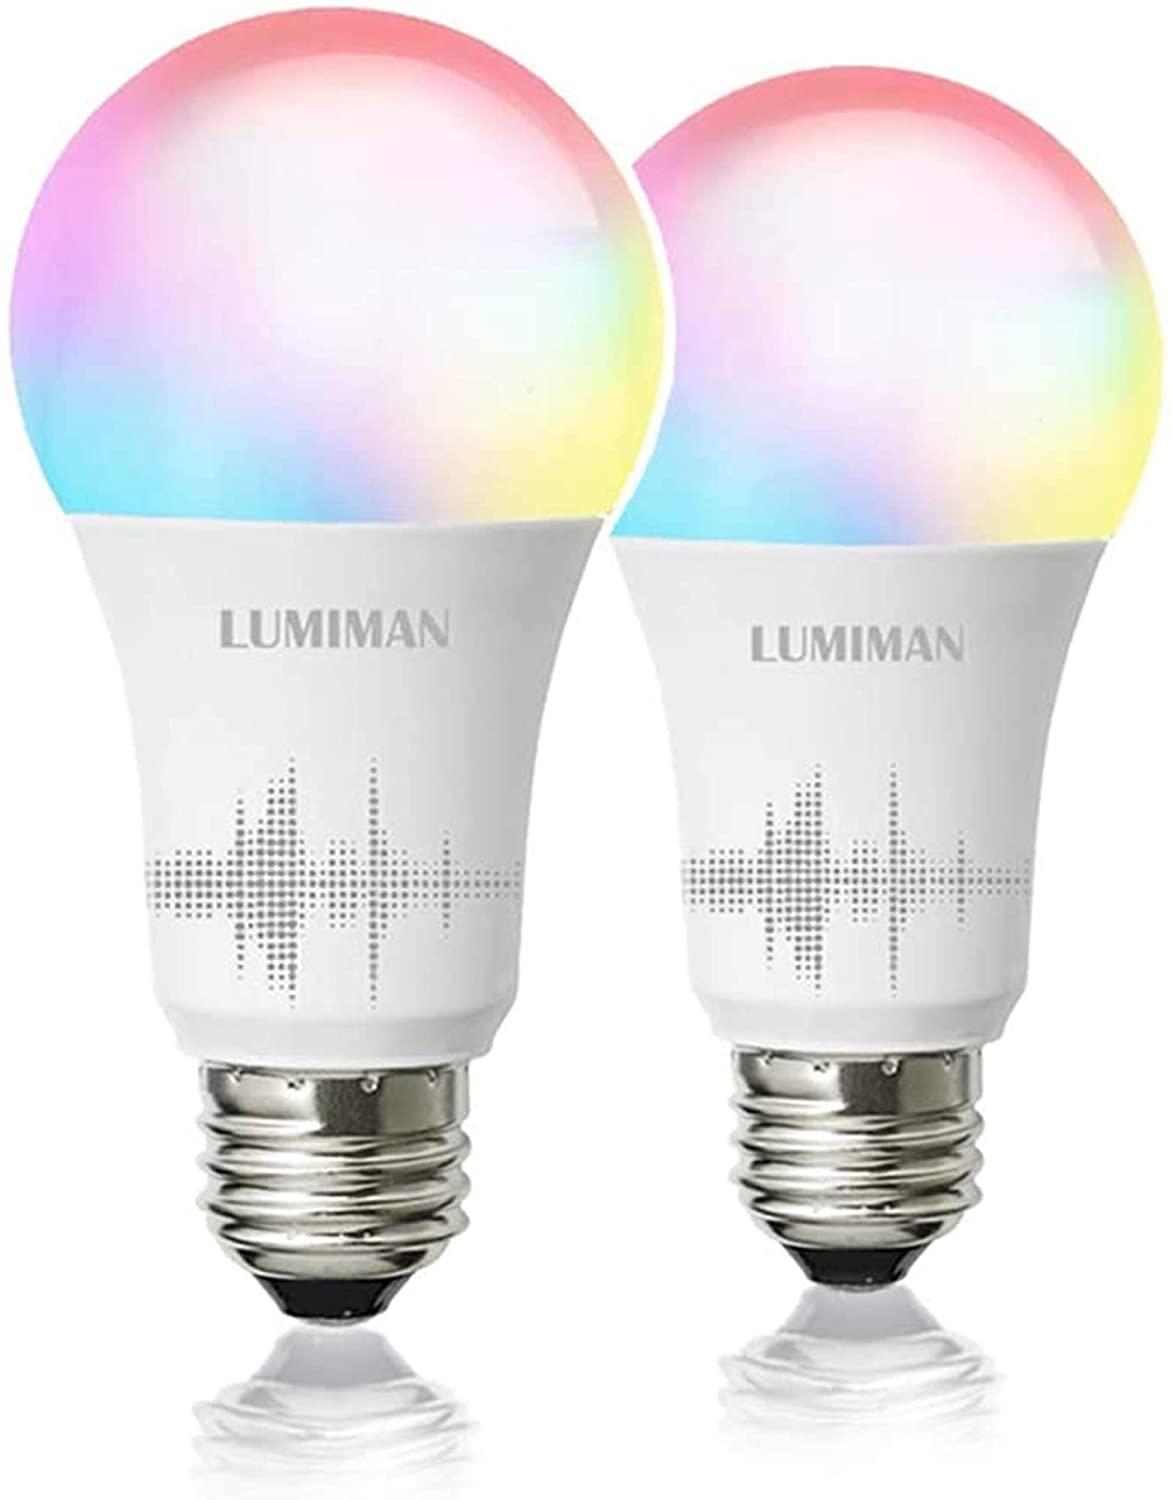 Amazon is having a one-day sale on smart color-changing light bulbs, dimmer switches and more — up to 60 percent off! 